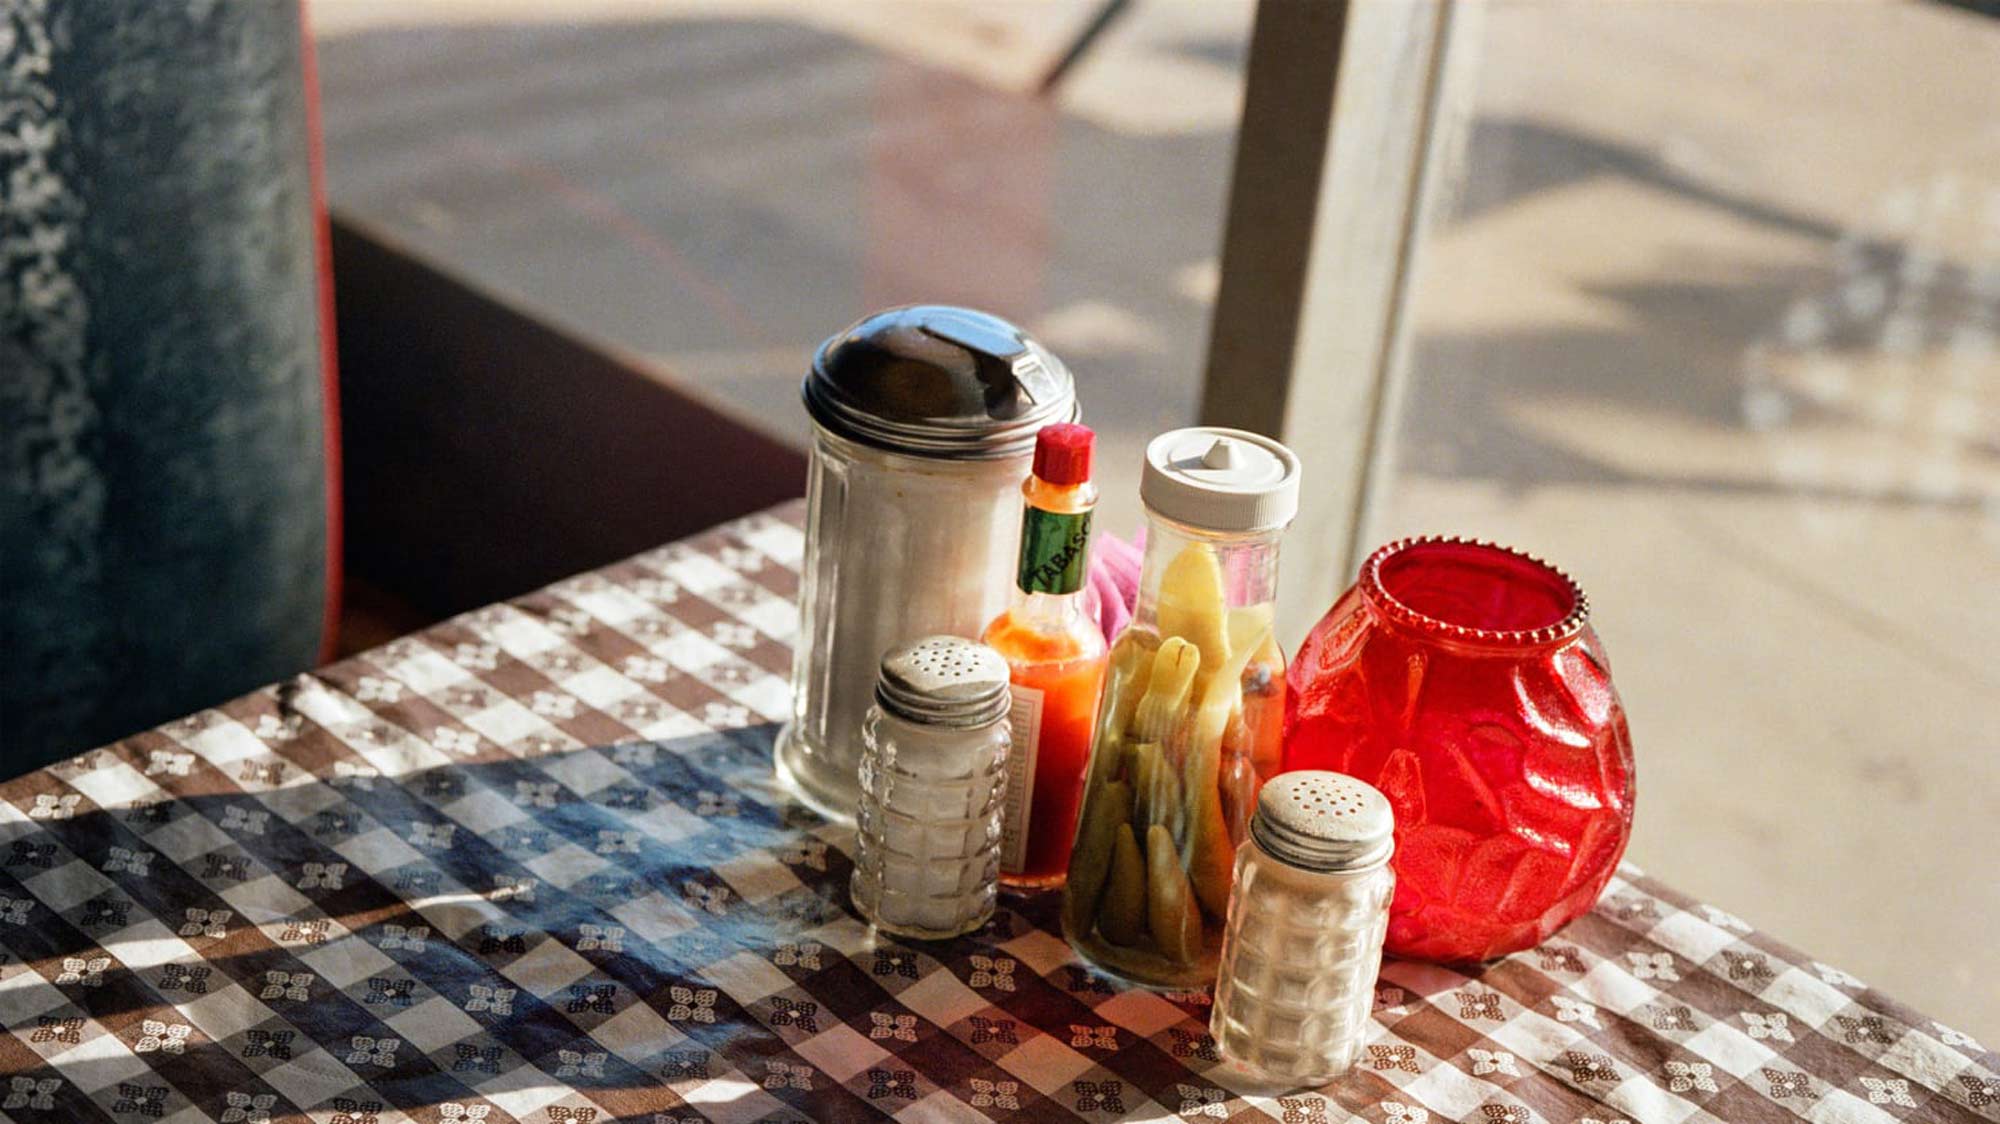 William Eggleston, the Pioneer of Color Photography - The 